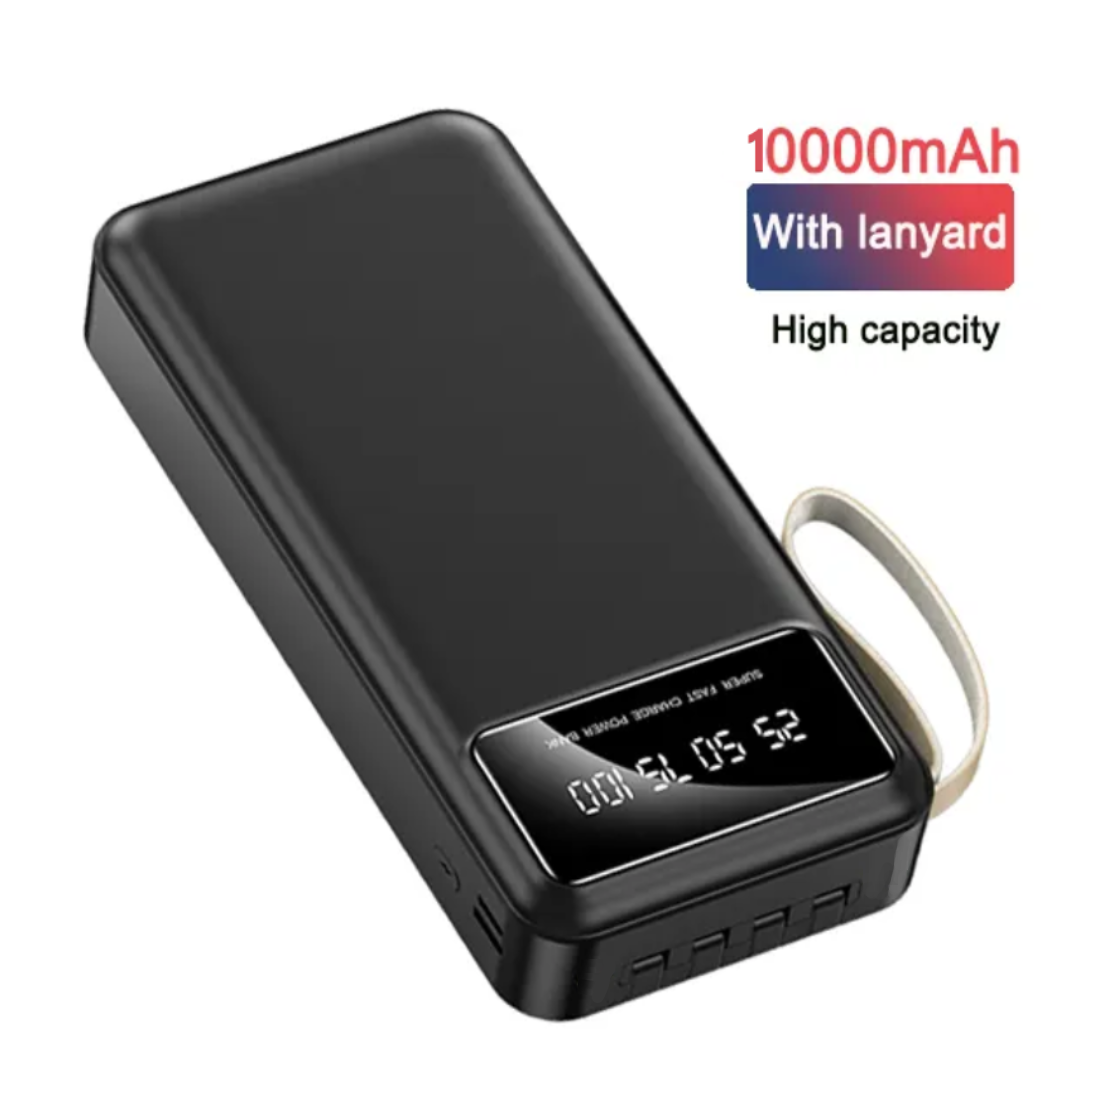 Digital display power bank comes with 4-wire 10000 mAh Capacity (1inch Display)